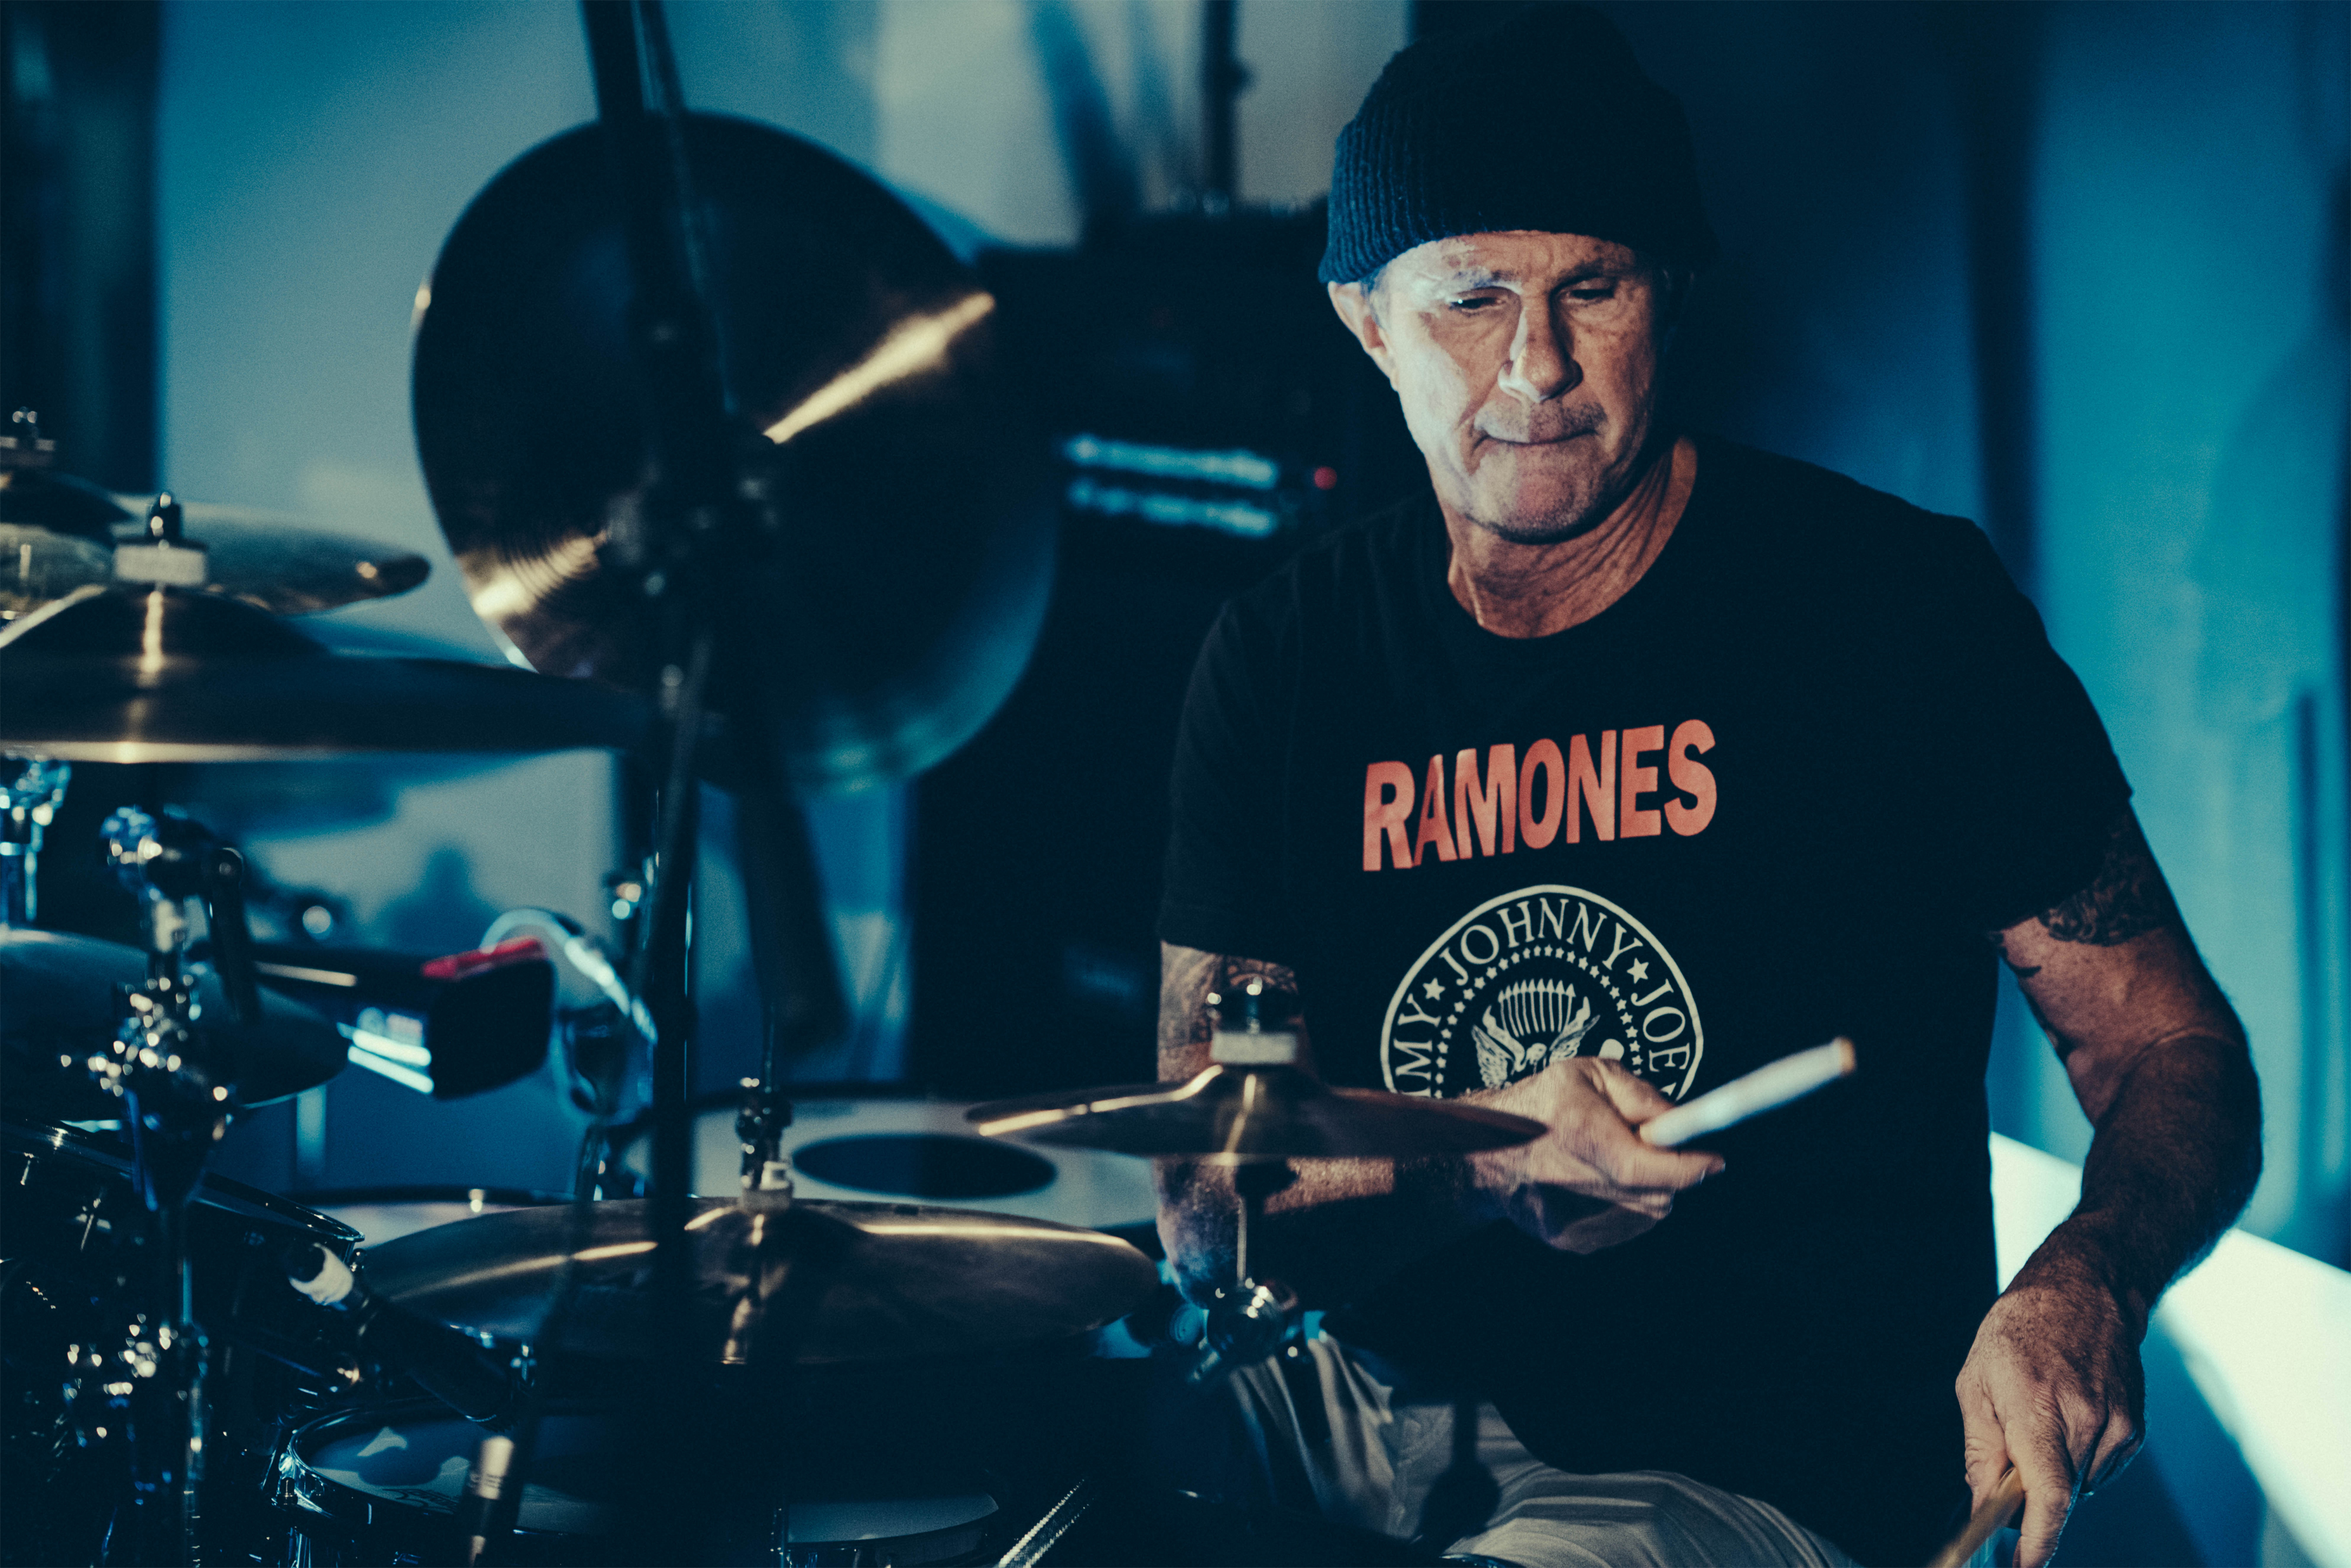 ACM welcome Red Hot Chilli Peppers drummer, Chad Smith.